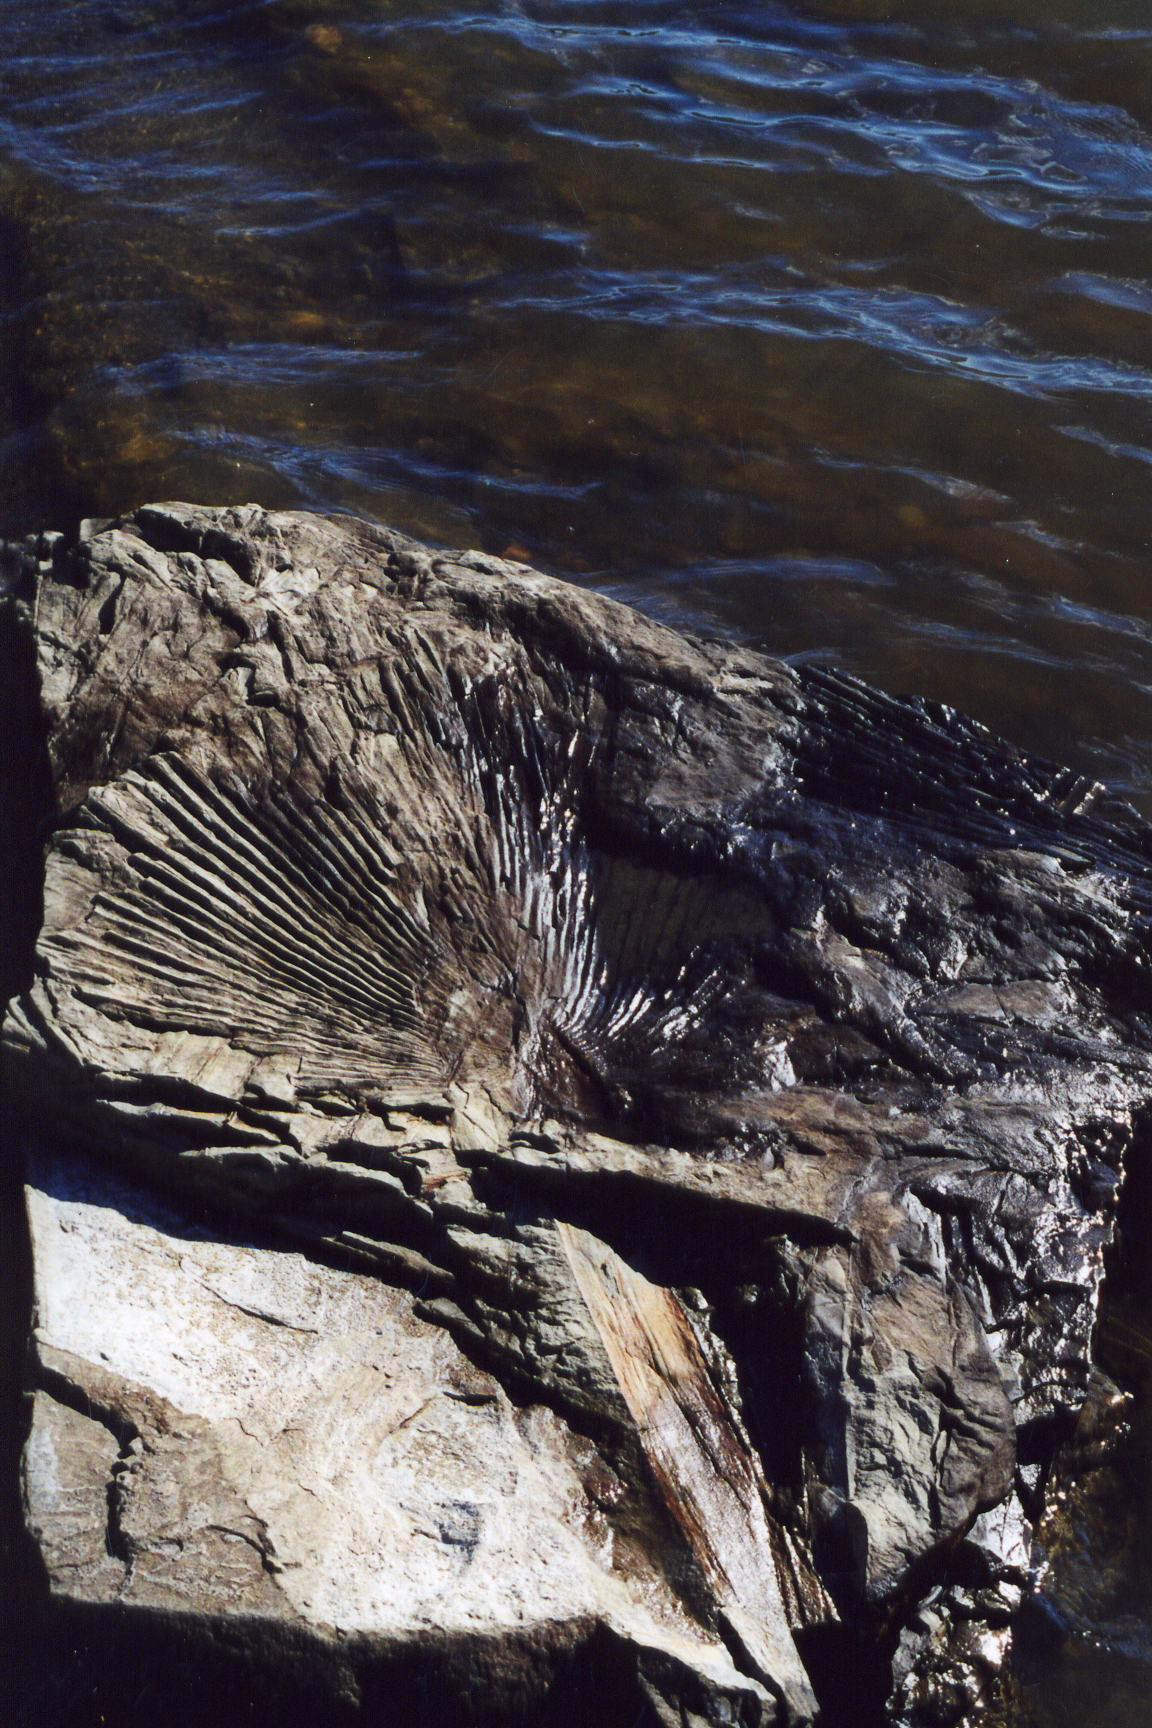 Shell fossil in rock